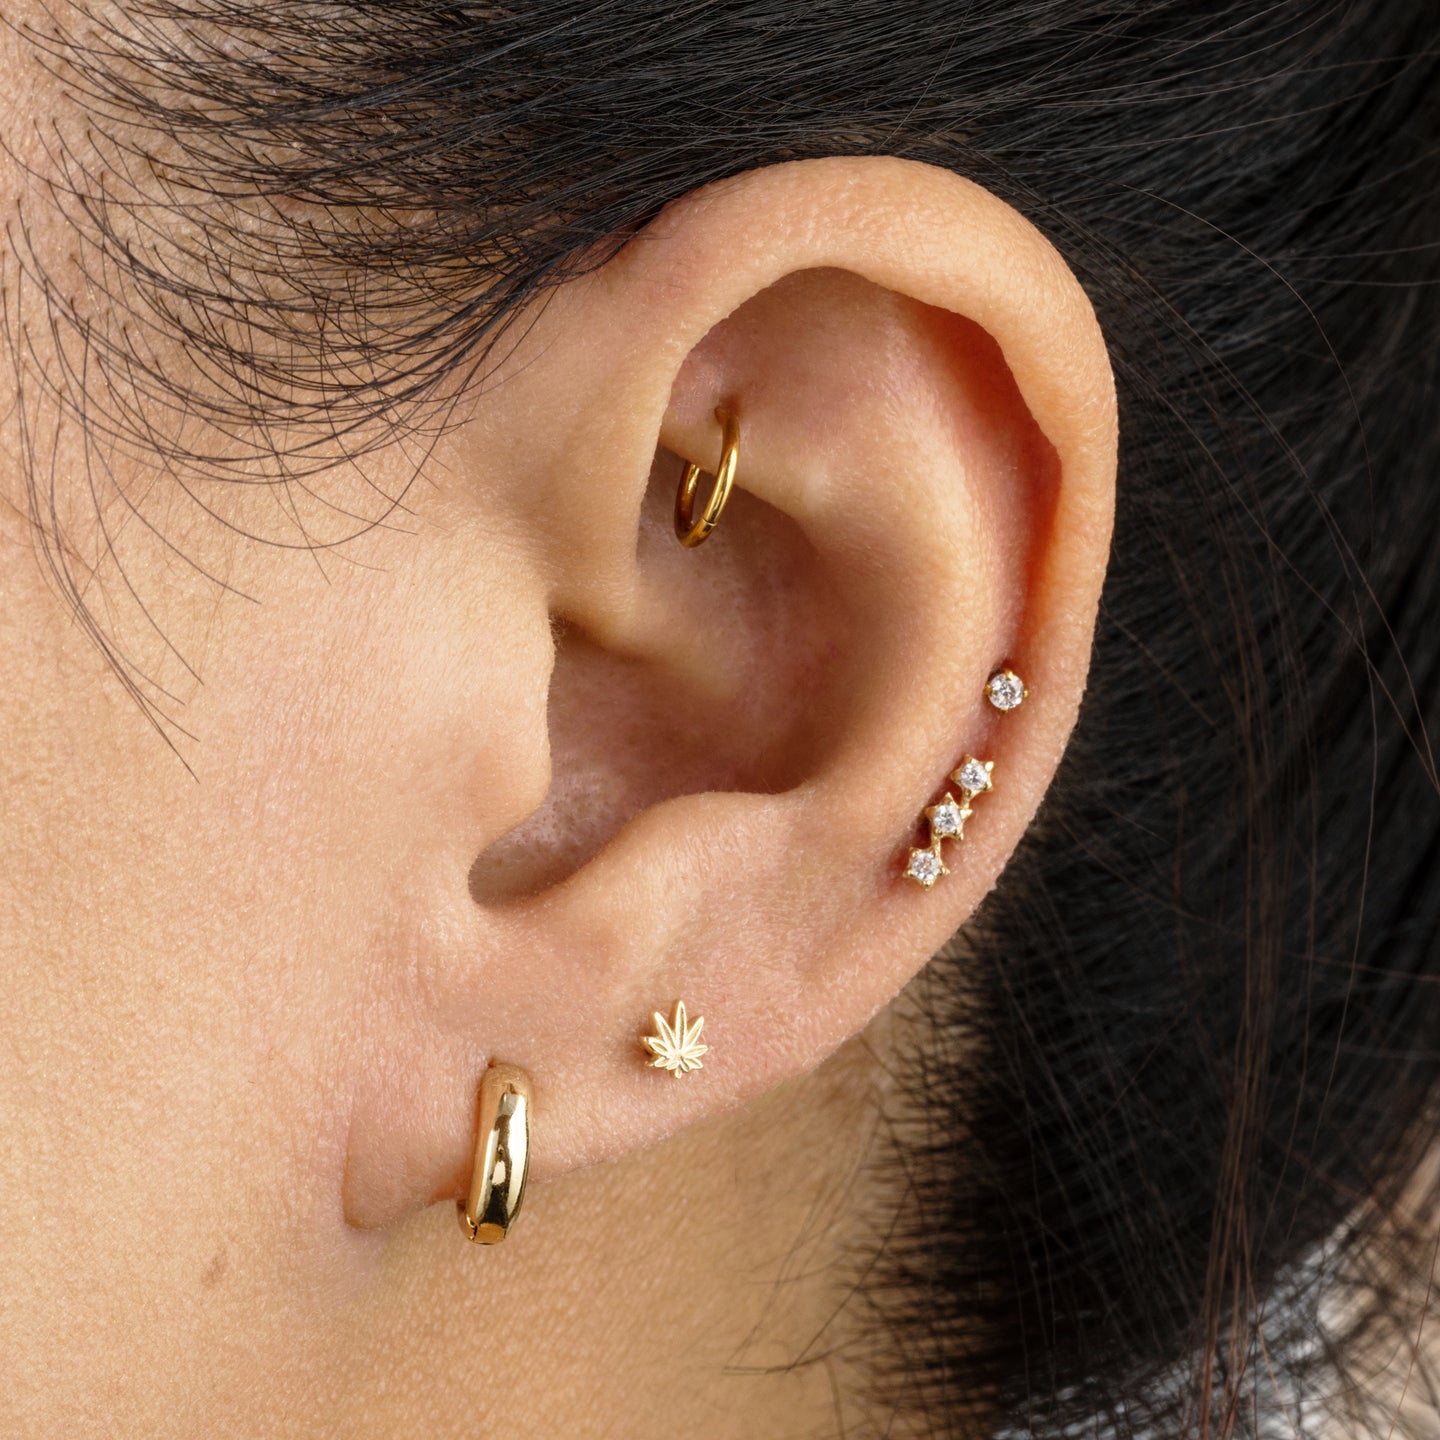 This is a 14k gold stud with 3 CZ's in a star shape color:null|14k gold/clear|gold/clear